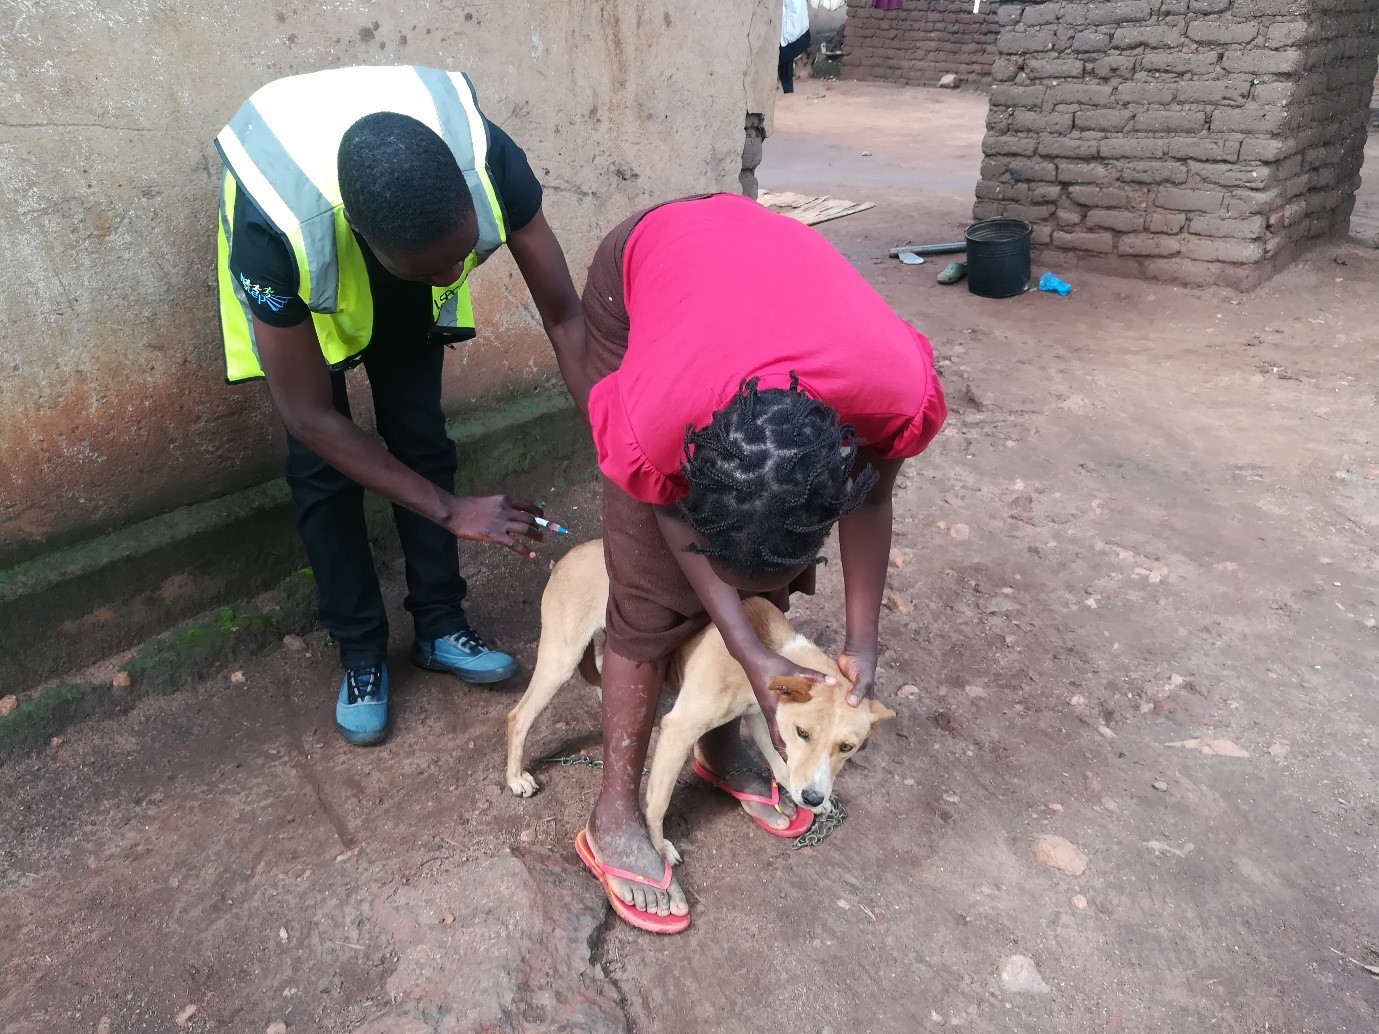 Why do we need to eliminate rabies?